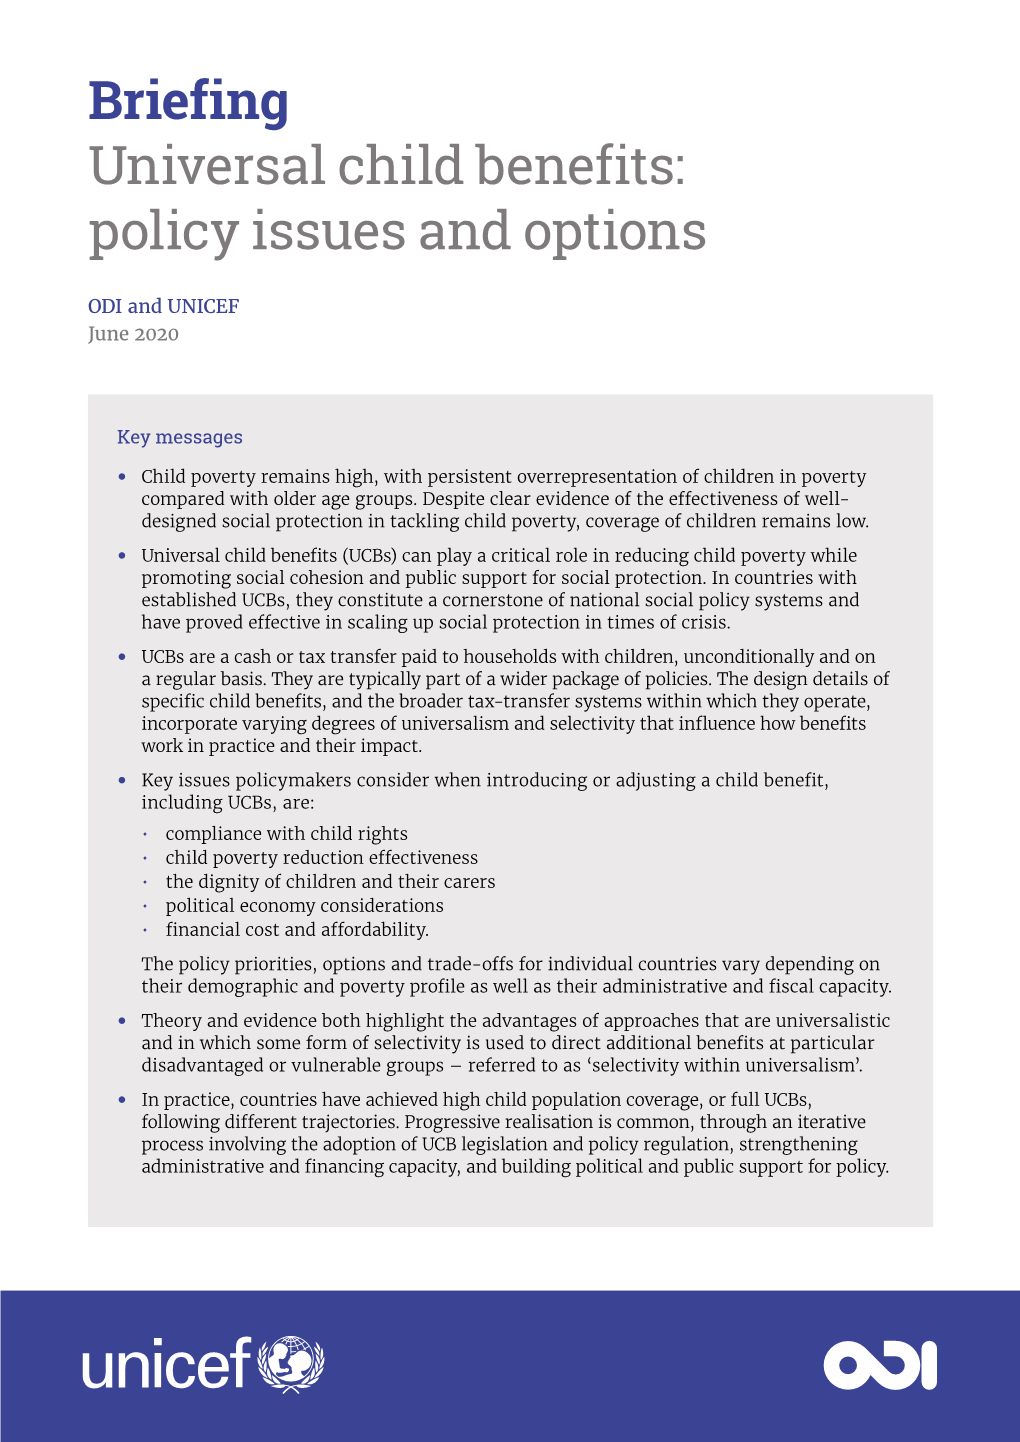 Briefing Universal Child Benefits: Policy Issues and Options